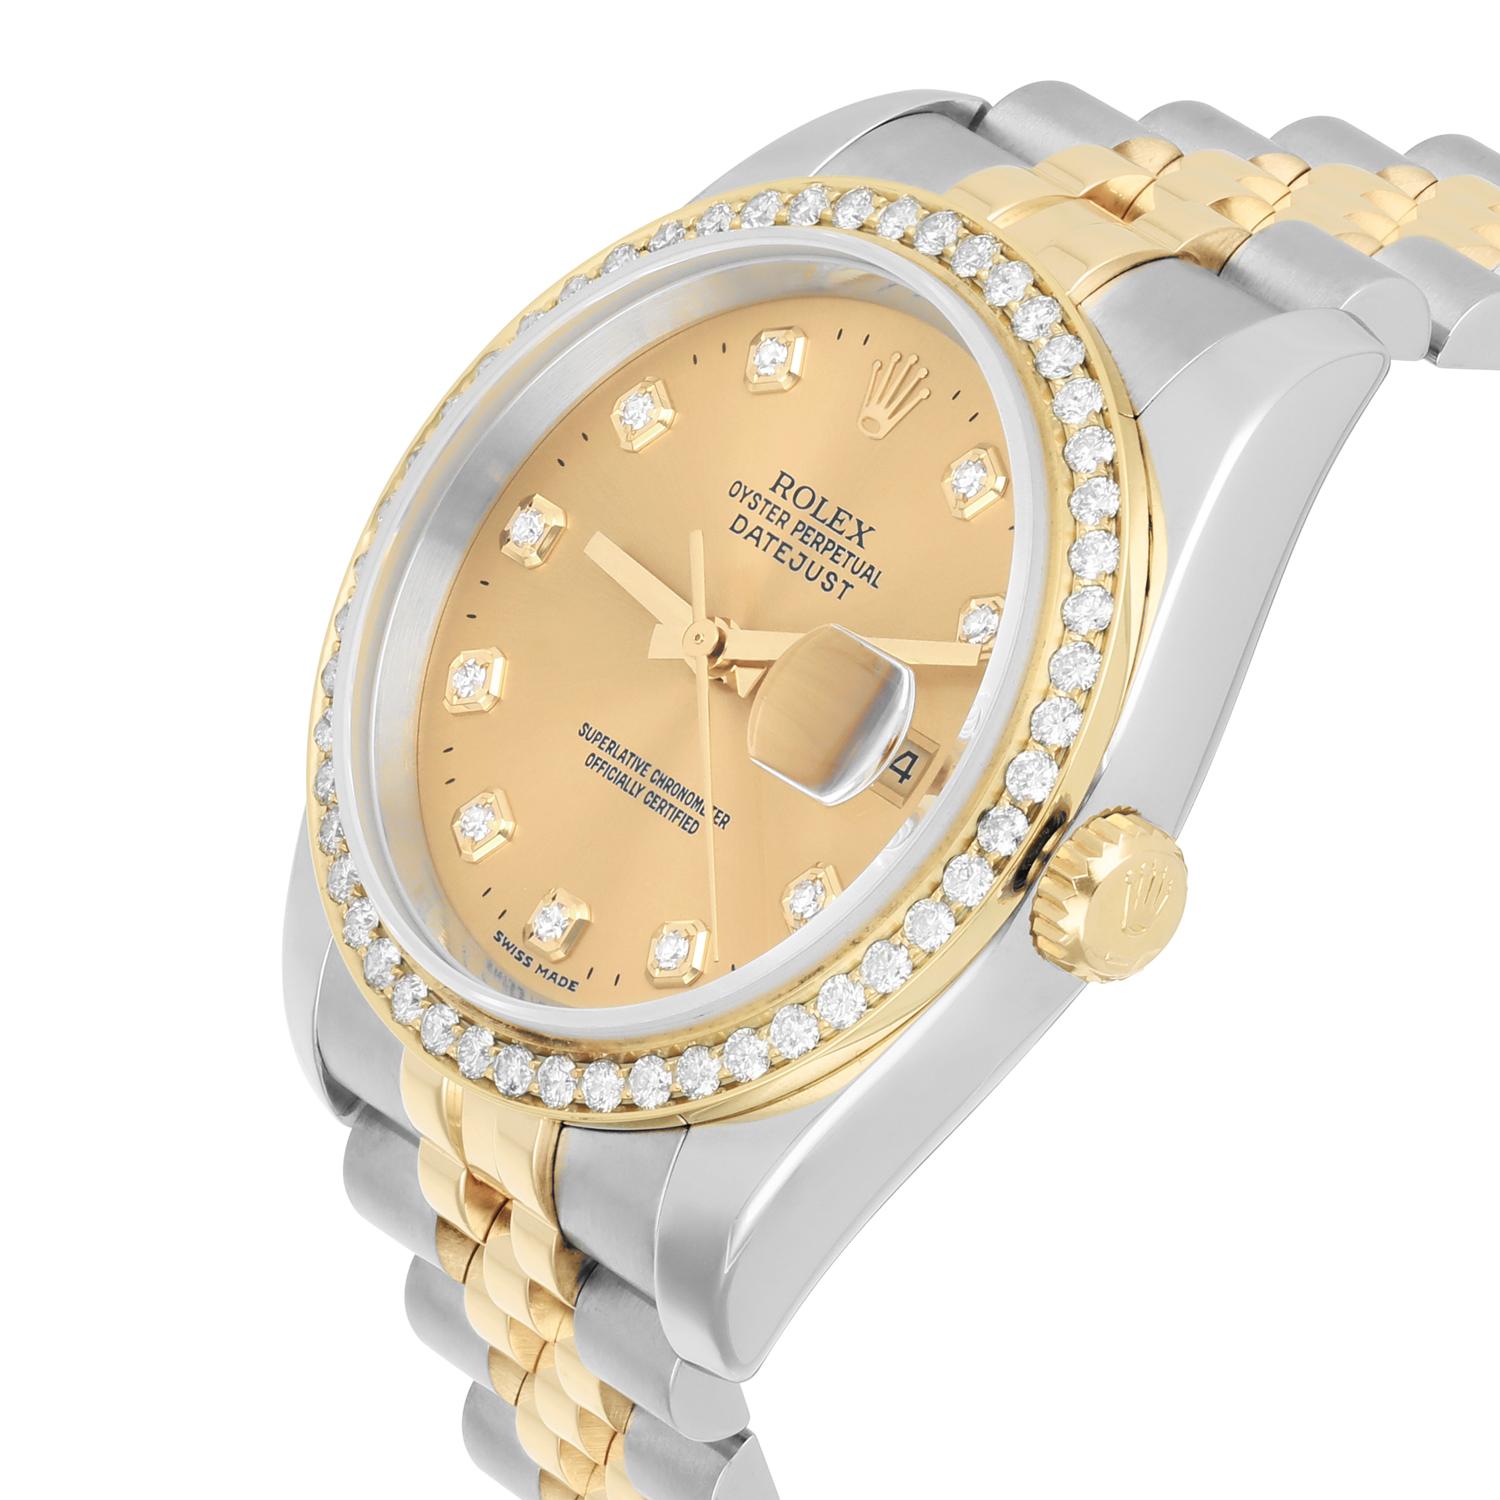 Rolex Datejust 36 Gold & Steel 116233 Watch Champagne Dial Jubilee Watch In Excellent Condition For Sale In New York, NY